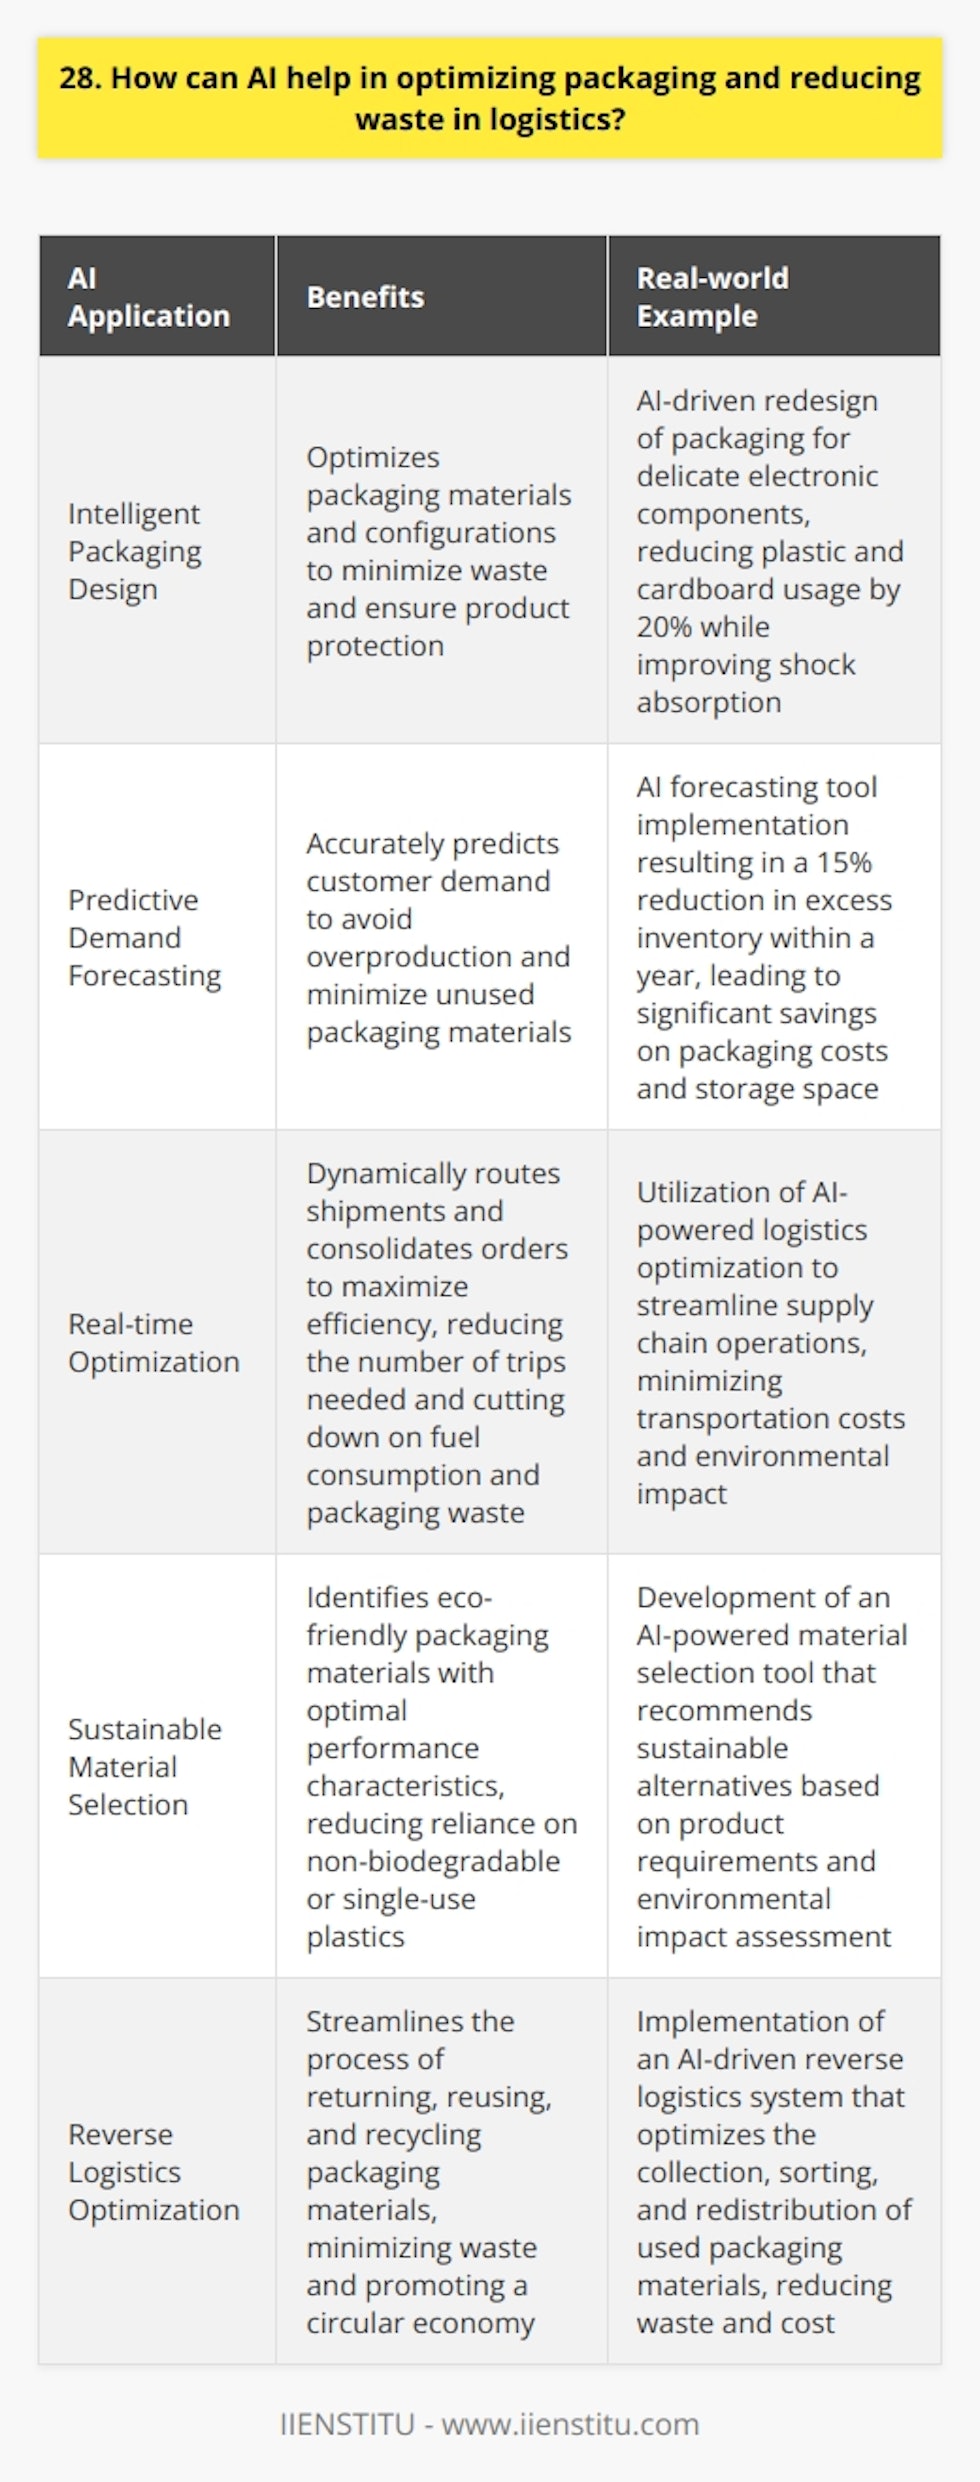 From my experience working in logistics, I believe AI can revolutionize packaging optimization and waste reduction. By analyzing vast amounts of data on product dimensions, shipping routes, and customer preferences, AI algorithms can identify patterns and insights that humans might miss. Intelligent Packaging Design AI can help design smarter, more efficient packaging tailored to each products unique requirements. By considering factors like fragility, temperature sensitivity, and shipping distance, AI can recommend the optimal packaging materials and configurations to minimize waste while ensuring product protection. I once worked on a project where we used AI to redesign the packaging for a line of delicate electronic components. The algorithm suggested a new layout that used 20% less plastic and cardboard while actually improving shock absorption during transport. It was a win-win! Predictive Demand Forecasting Another key area where AI shines is demand forecasting. By accurately predicting customer demand, businesses can avoid overproduction and minimize unused packaging materials. AI models can analyze historical sales data, market trends, and even social media sentiment to generate precise demand estimates. In my last role, we piloted an AI forecasting tool that reduced our excess inventory by 15% within a year. This translated to significant savings on packaging costs and storage space. Real-time Optimization Finally, AI can optimize logistics in real-time by dynamically routing shipments and consolidating orders to maximize efficiency. This reduces the number of trips needed, cutting down on fuel consumption and packaging waste from multiple deliveries. Im excited about the potential for AI to drive sustainability in logistics while also improving the bottom line. As these technologies advance, I believe well see a new era of smart, waste-free supply chains.